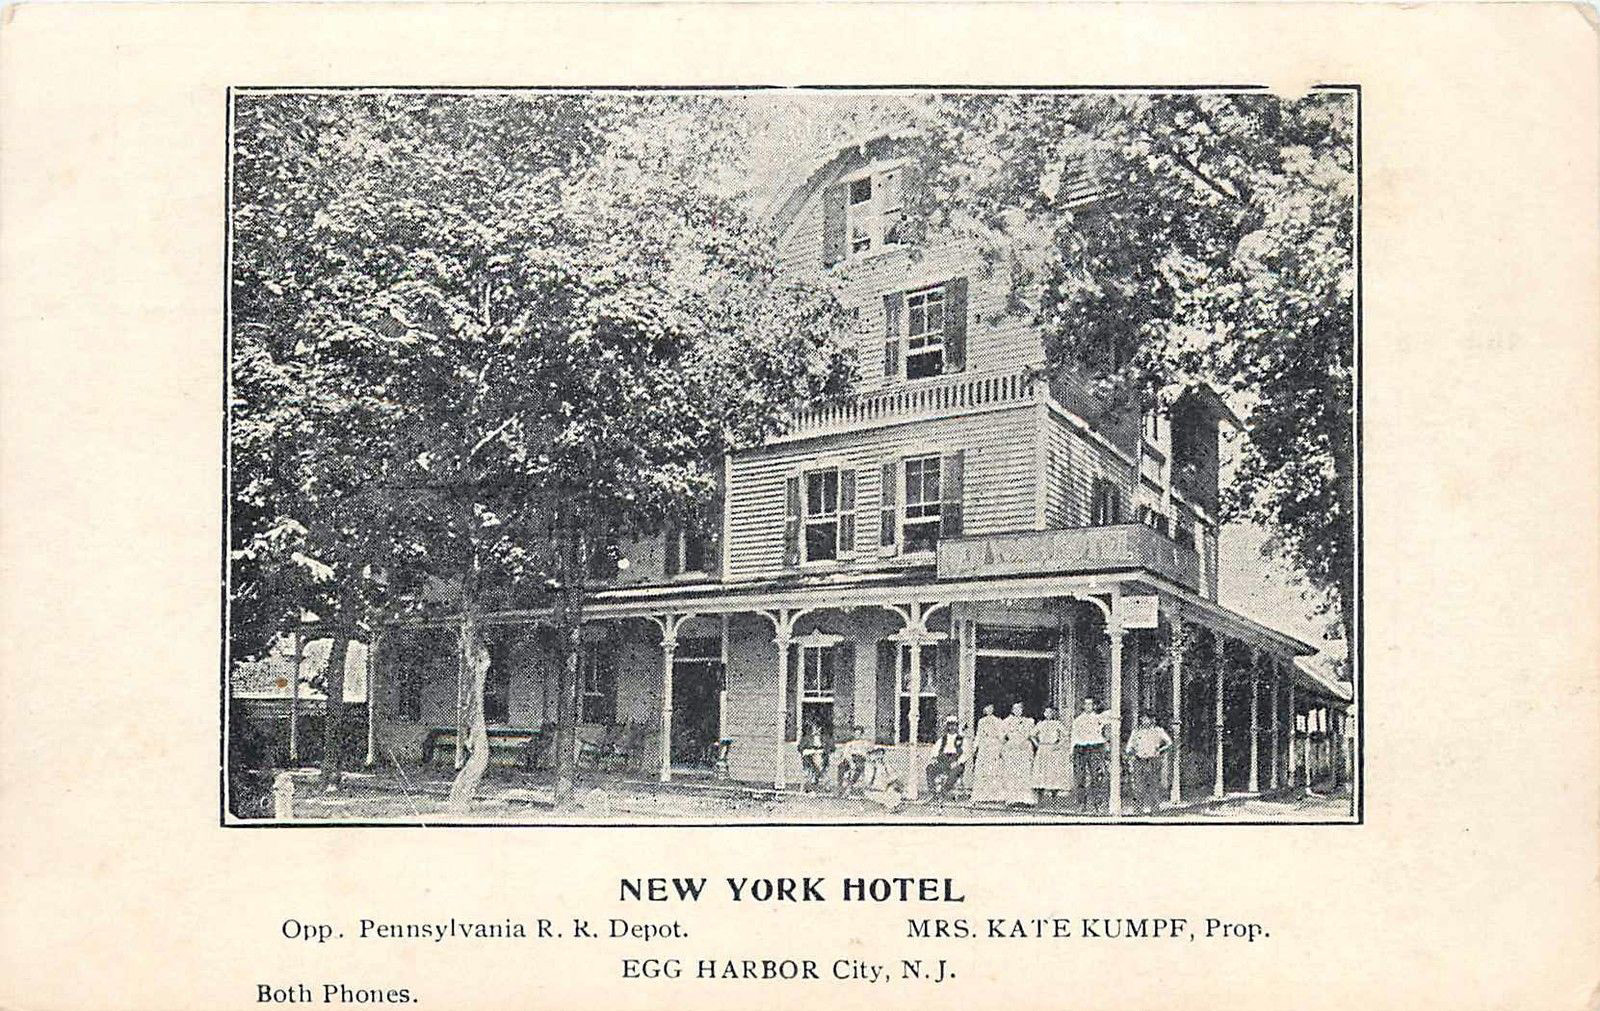 Egg Harbor City - New York Hotel with guests - c 1910